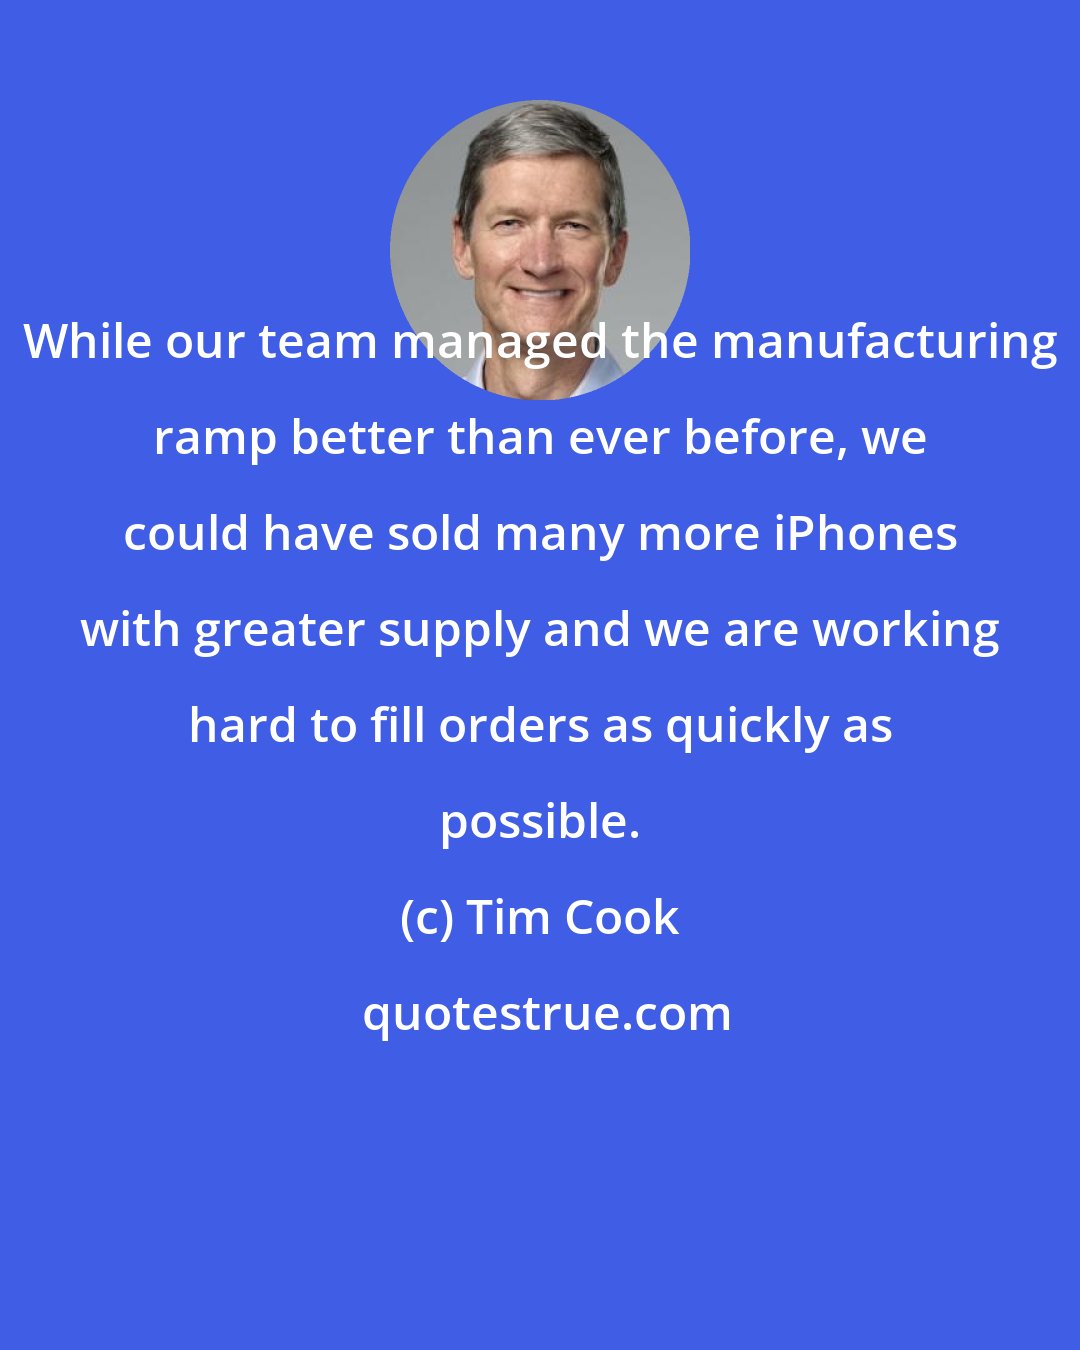 Tim Cook: While our team managed the manufacturing ramp better than ever before, we could have sold many more iPhones with greater supply and we are working hard to fill orders as quickly as possible.